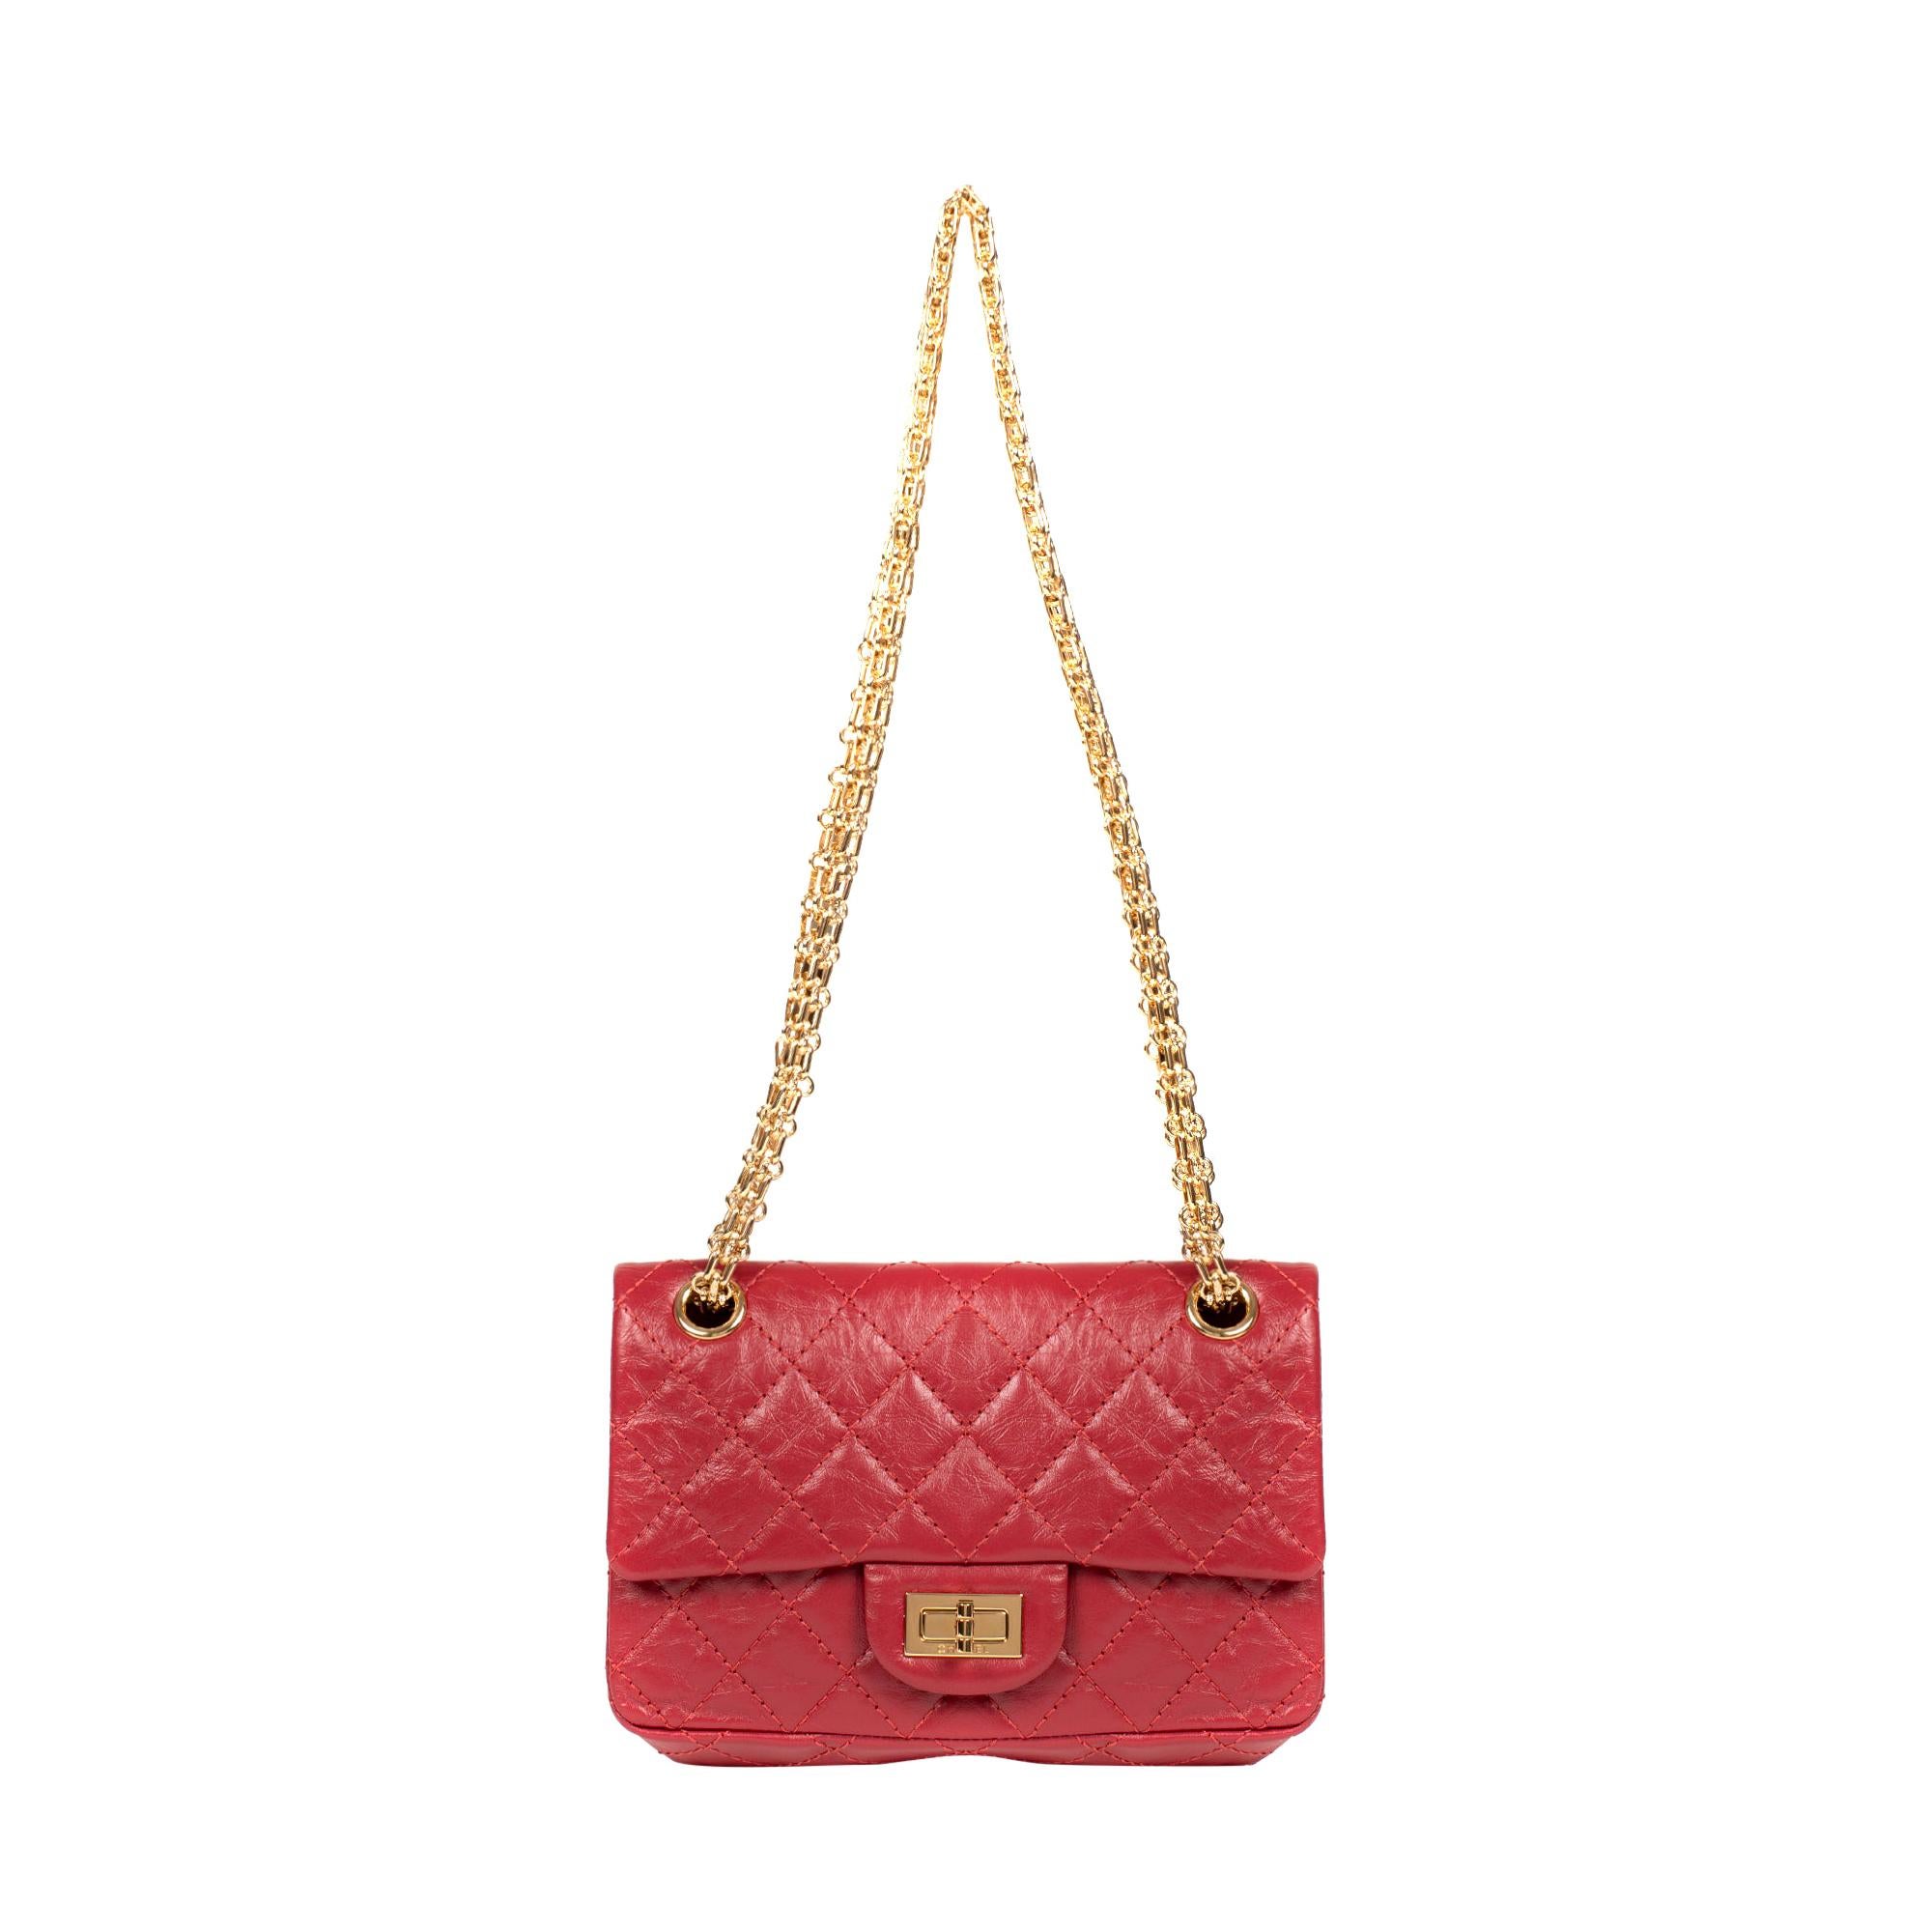 Rare Mini Chanel 2.55 Reissue handbag in red quilted leather, gold hardware